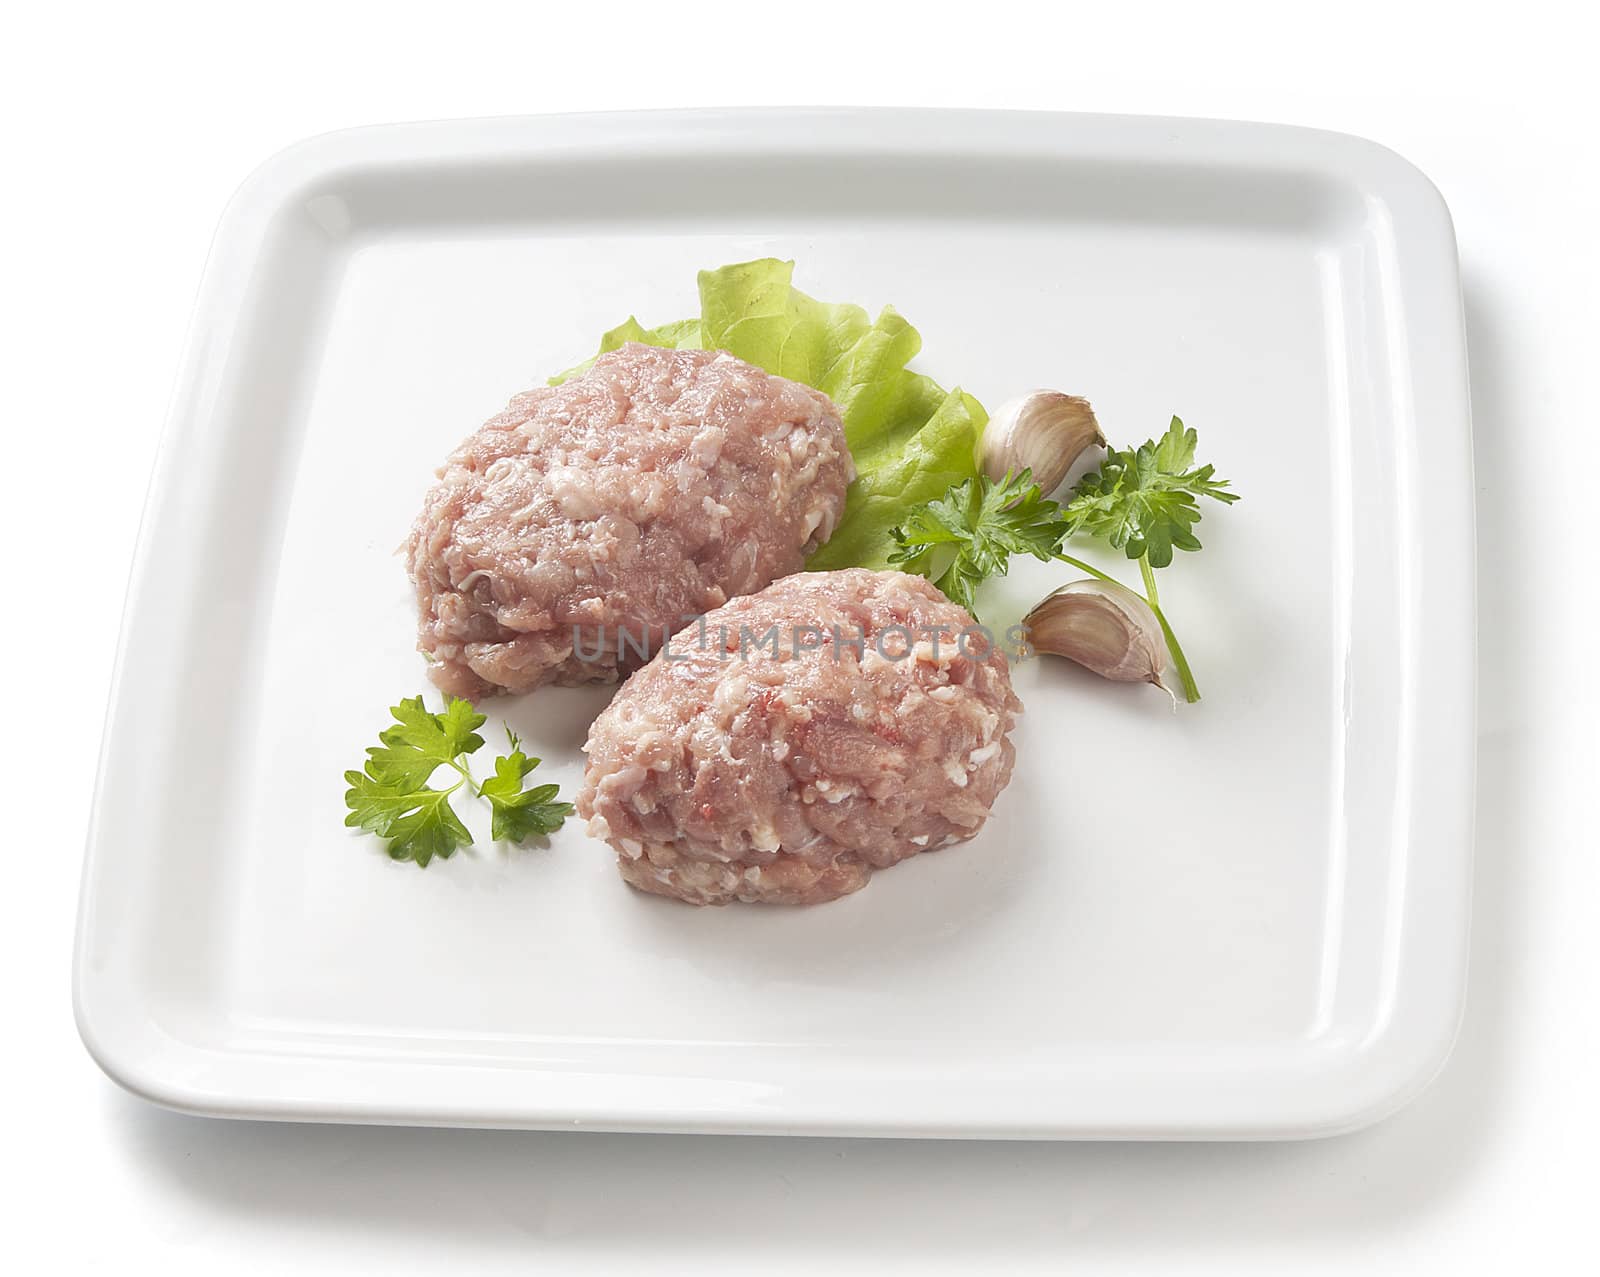 Two raw chicken rissoles with parsley, garlic and lettuce on the quad white plate